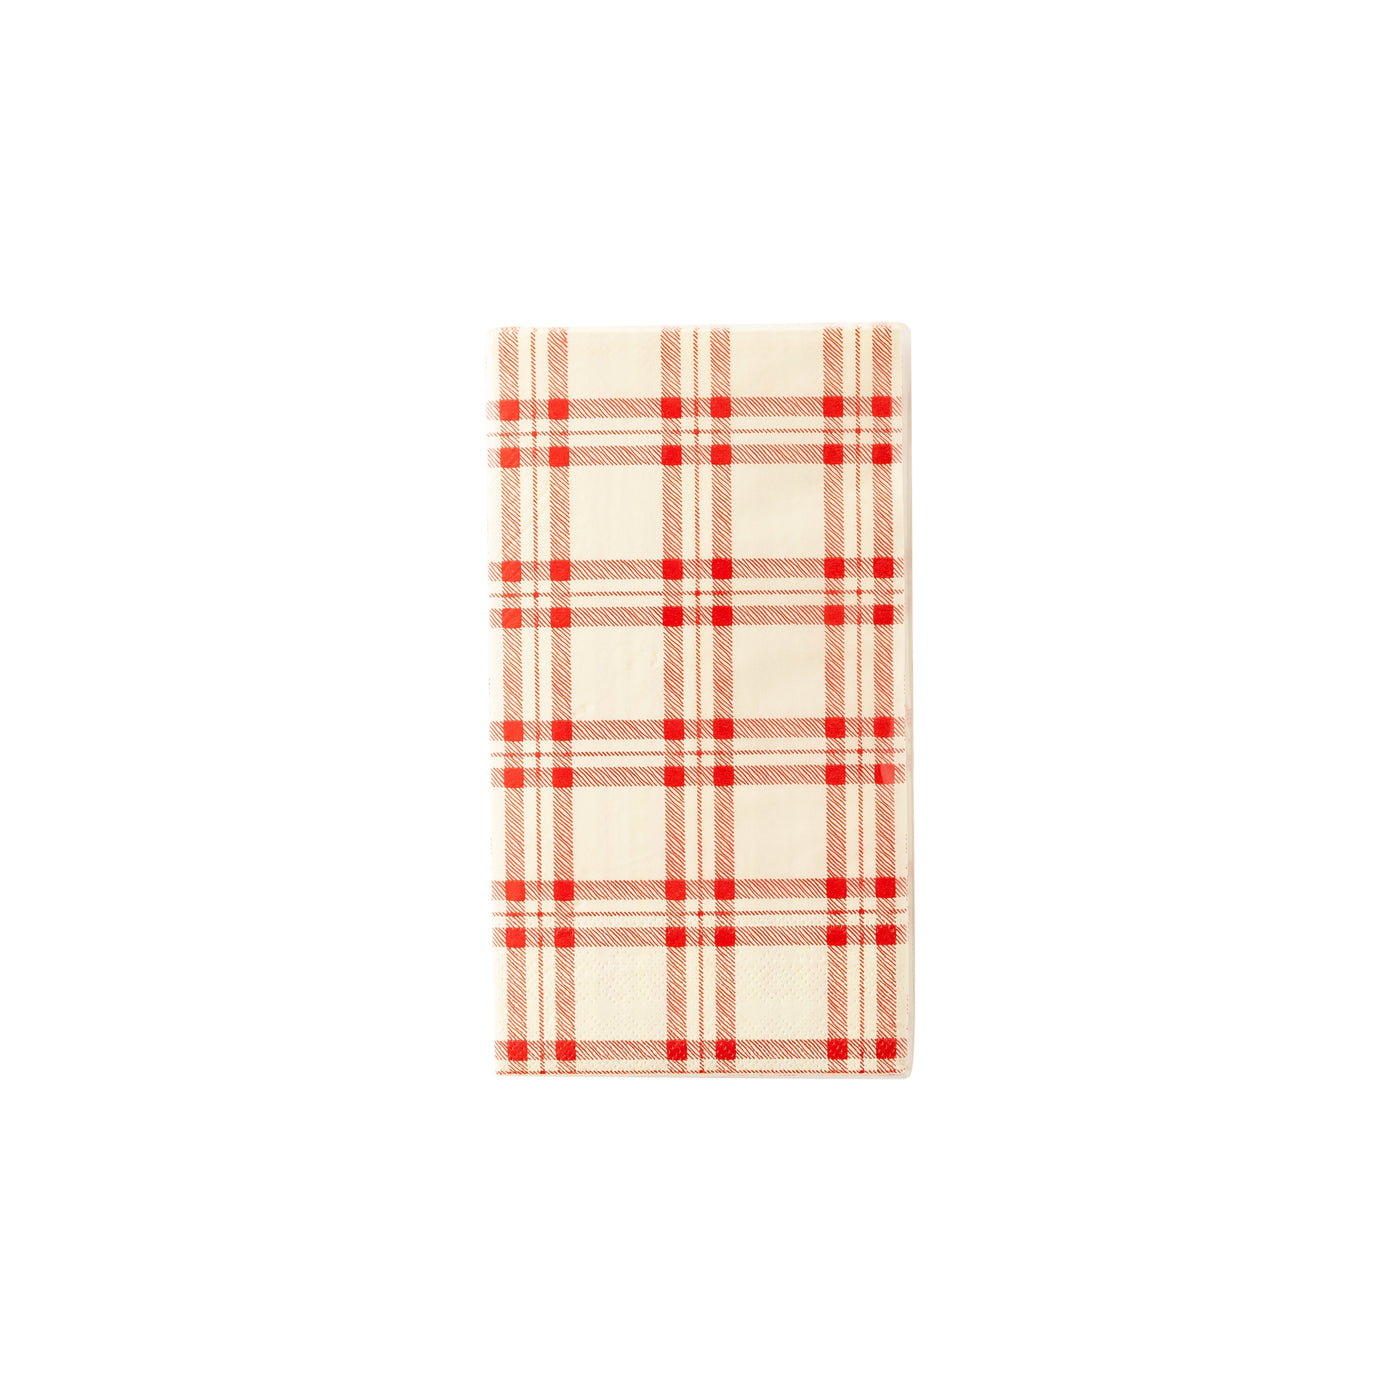 PLTS368C-MME - Red Plaid Paper Dinner Napkin